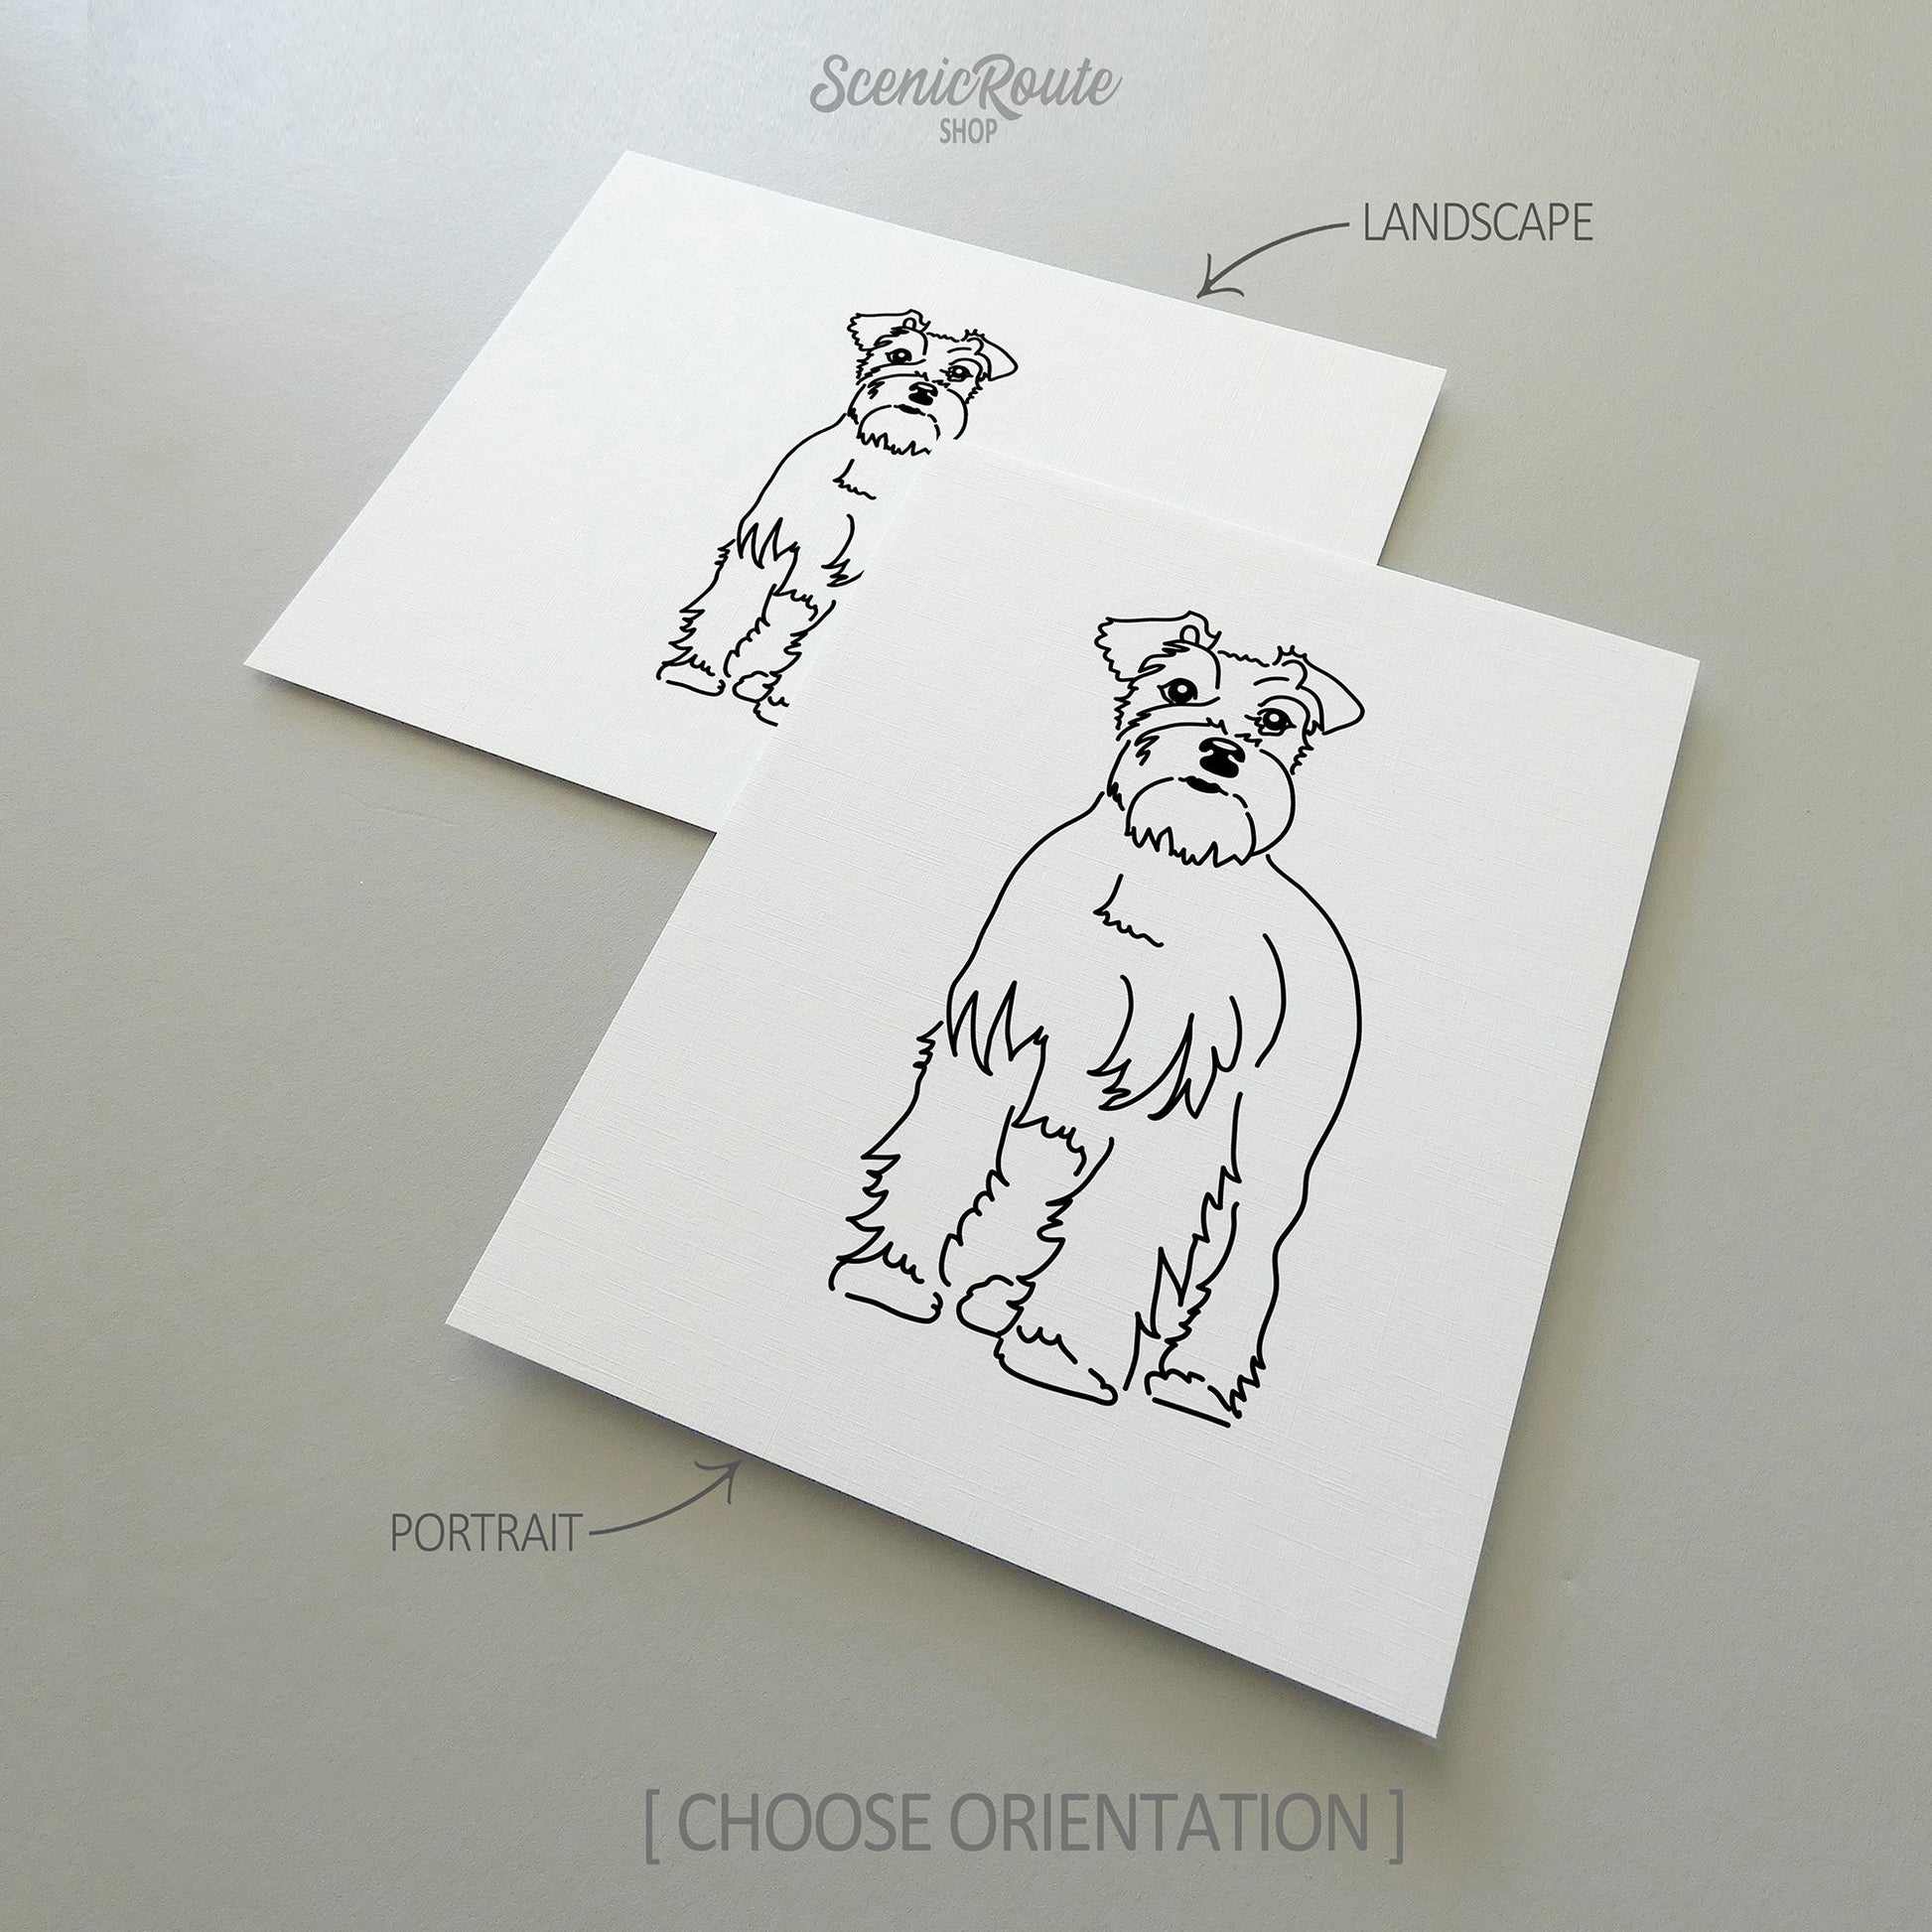 Two line art drawings of a Schnauzer dog on white linen paper with a gray background.  The pieces are shown in portrait and landscape orientation for the available art print options.